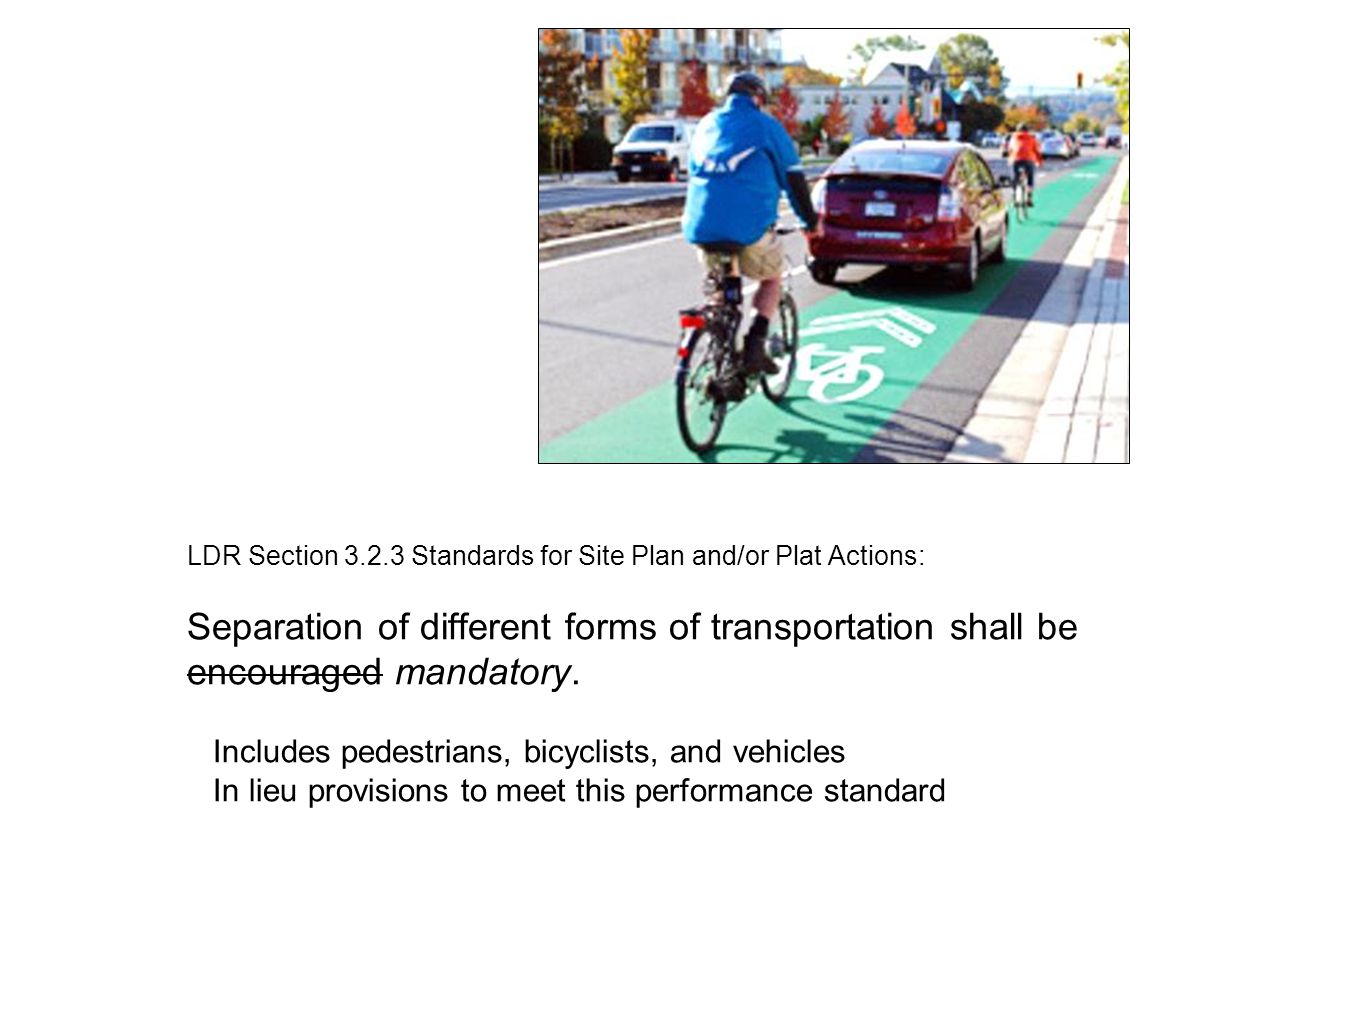 LDR Section Standards for Site Plan and/or Plat Actions: Separation of different forms of transportation shall be encouraged mandatory.